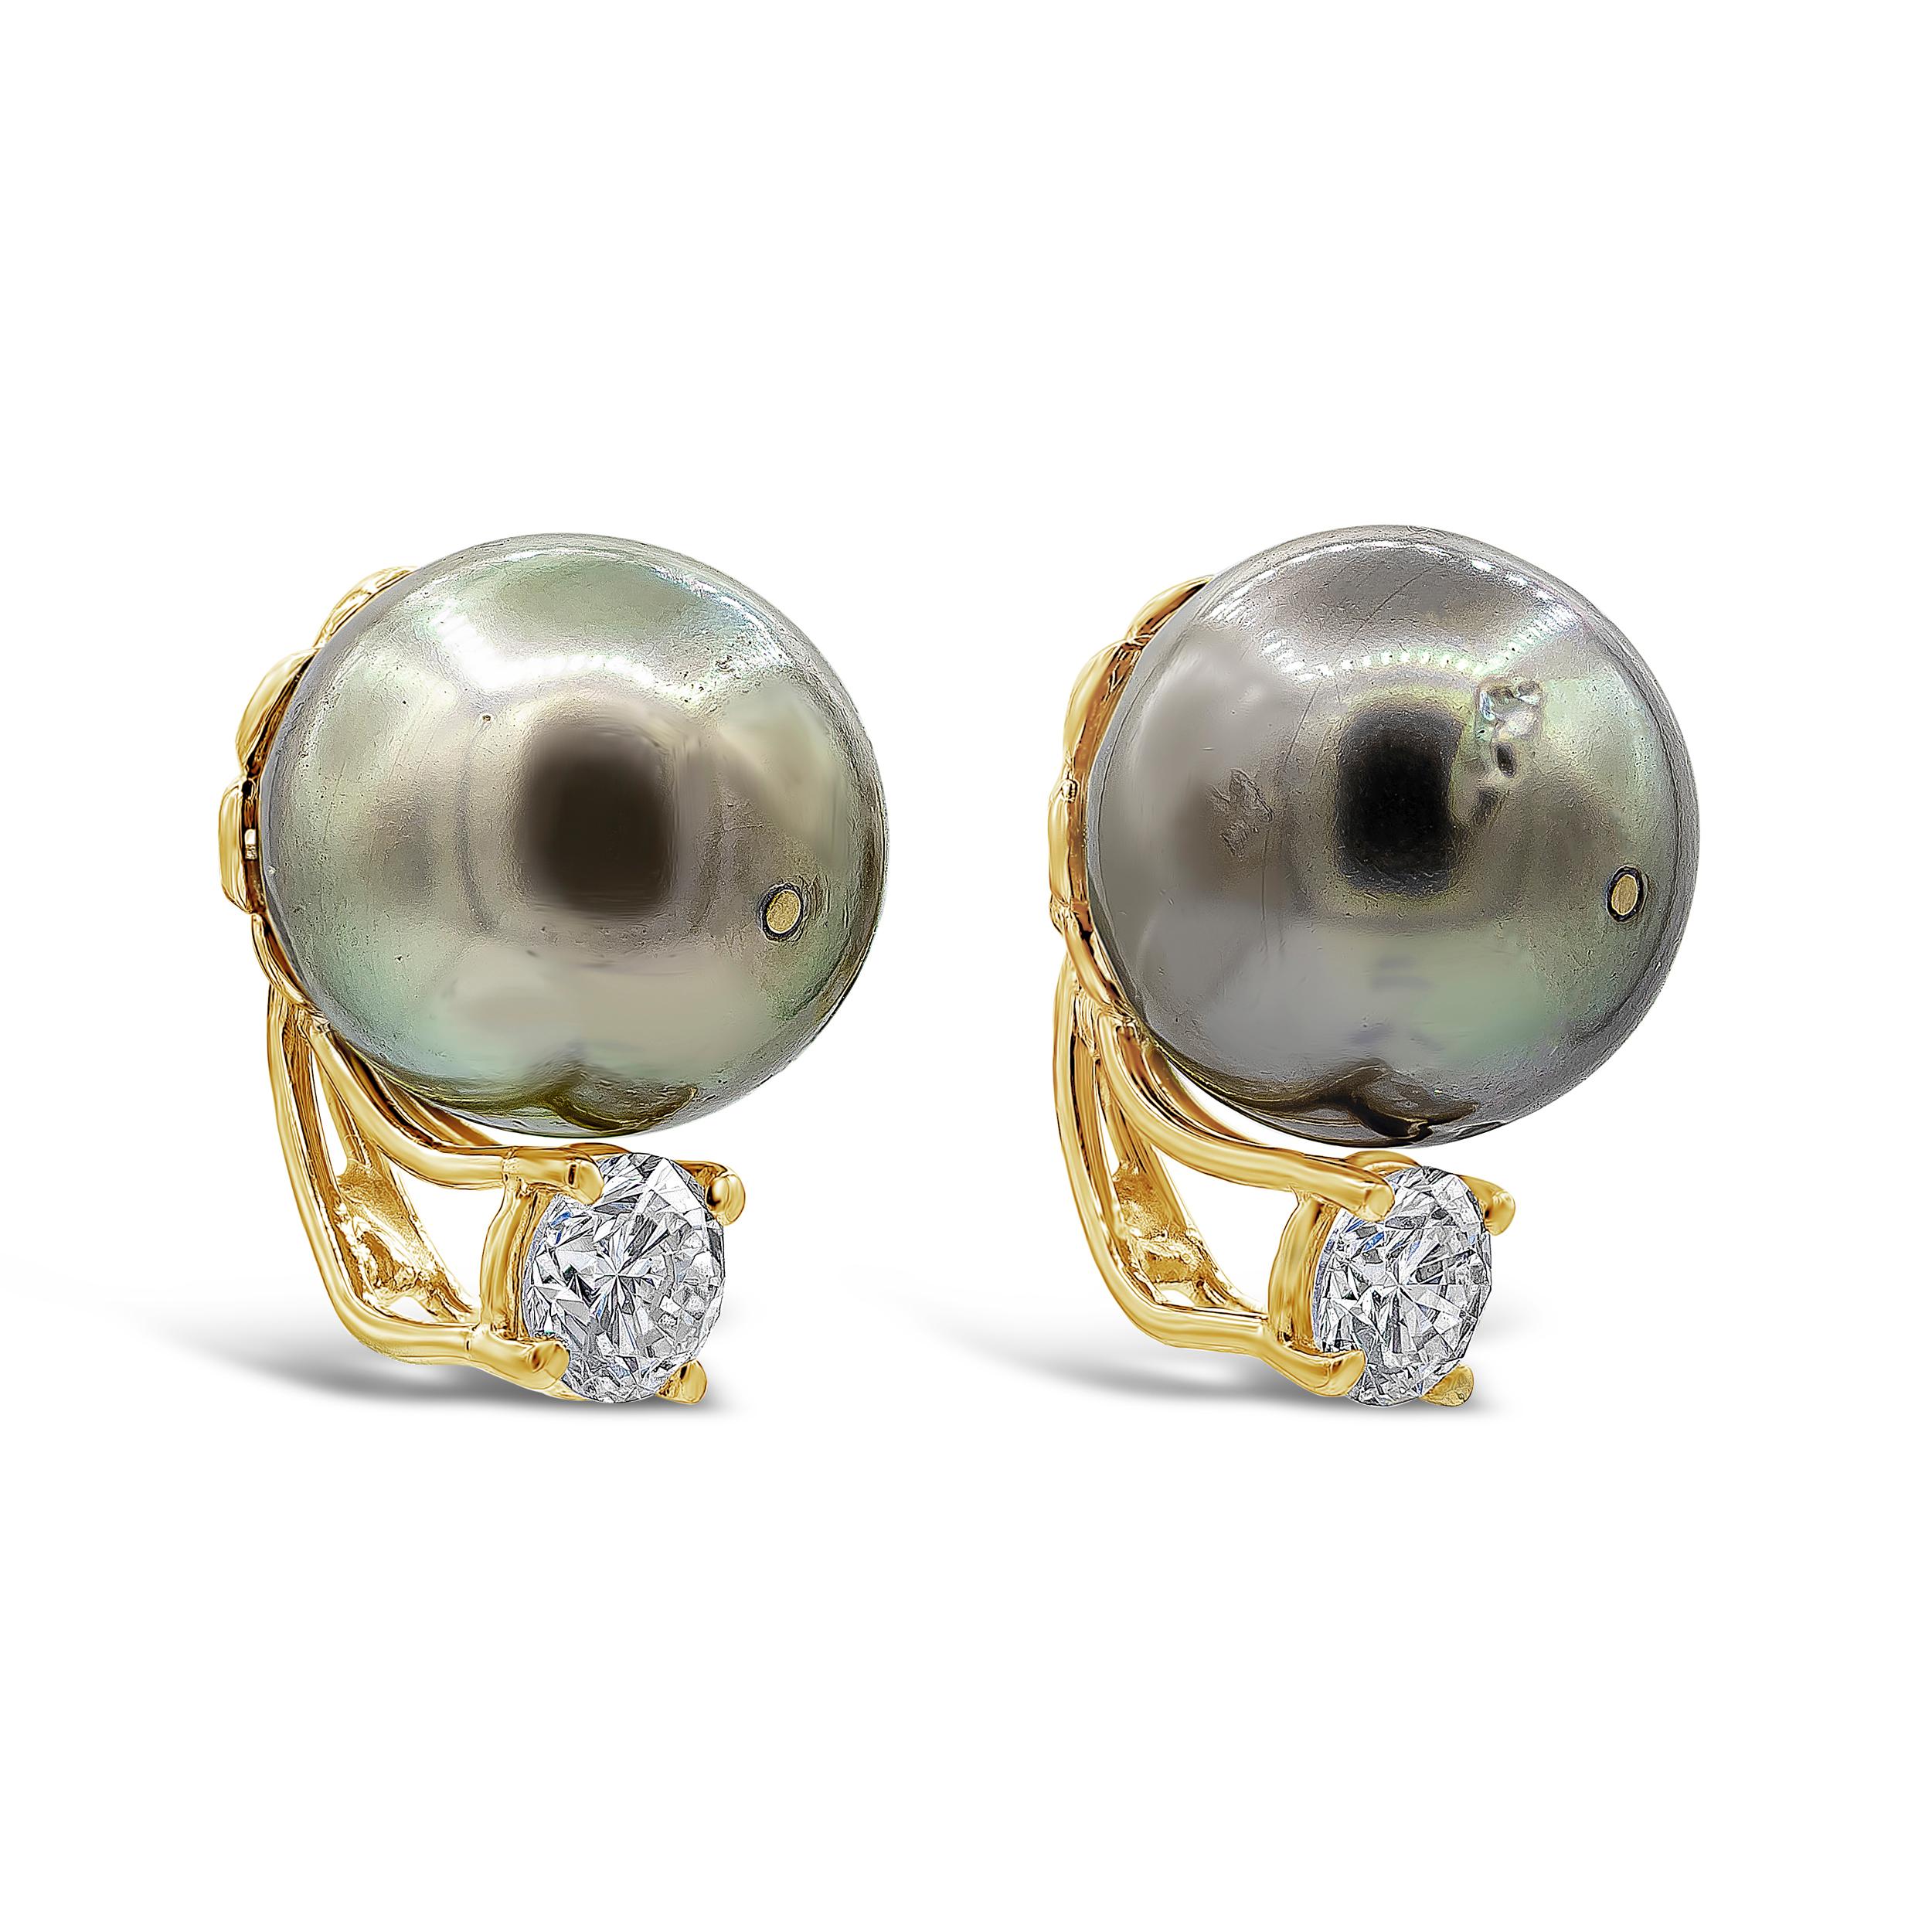 A simple elegant pair of 12mm Tahitian pearl earrings accented by a single brilliant round diamond. Diamonds weigh 0.88 carats total. Made in 18K Yellow Gold

Style available in different price ranges. Prices are based on your selection. Please